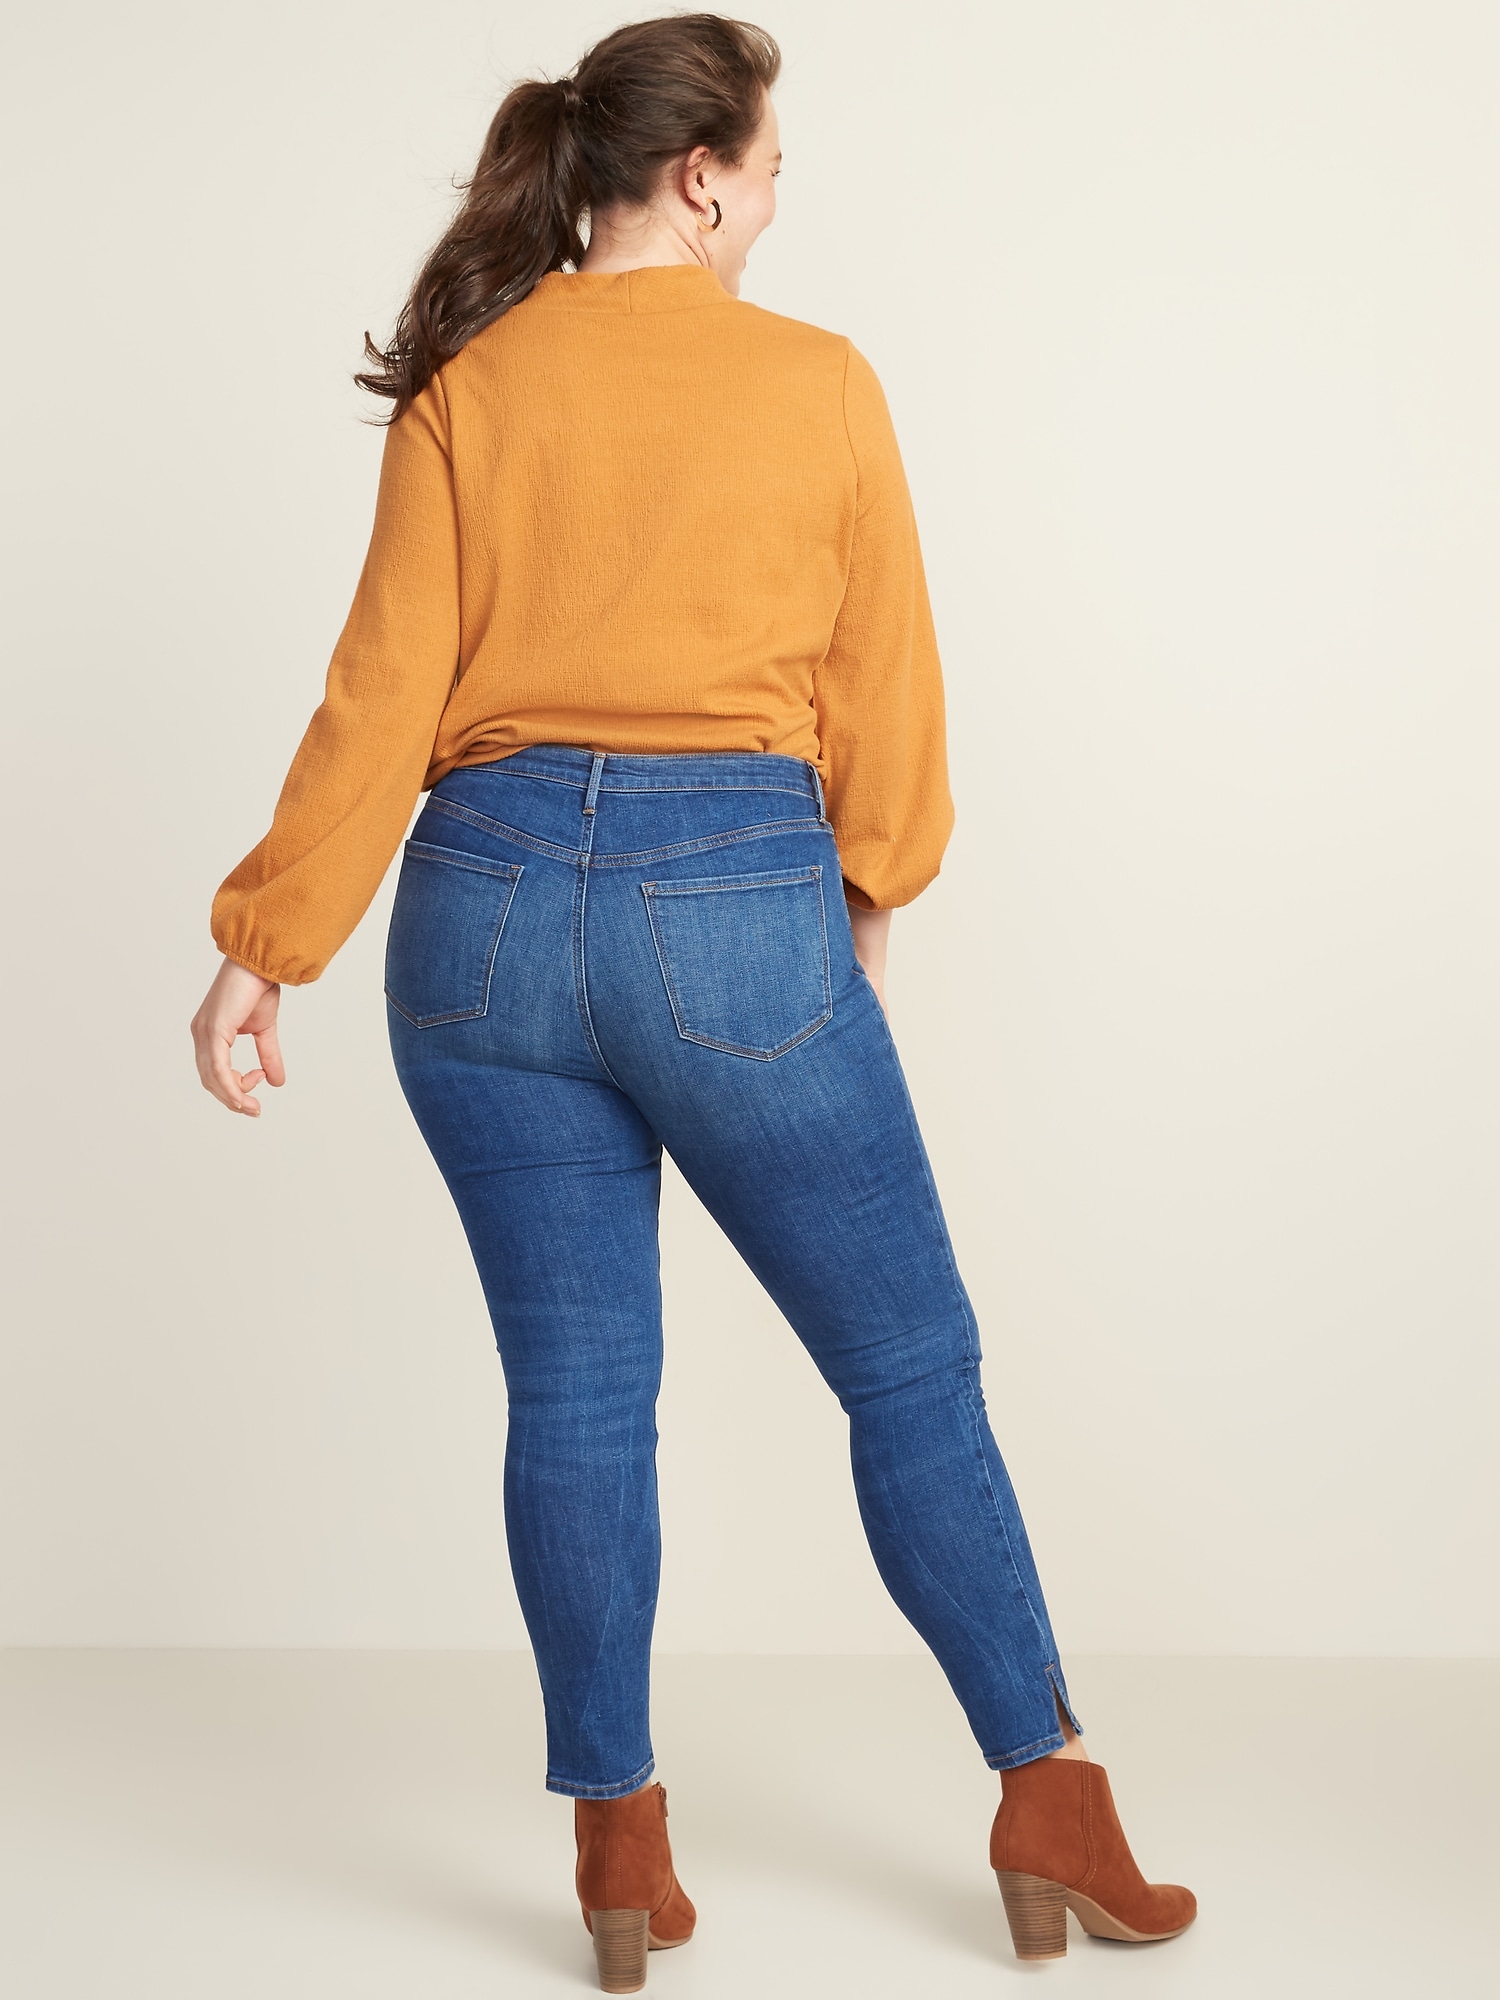 High Waisted Button Fly Rockstar Jeans For Women Old Navy